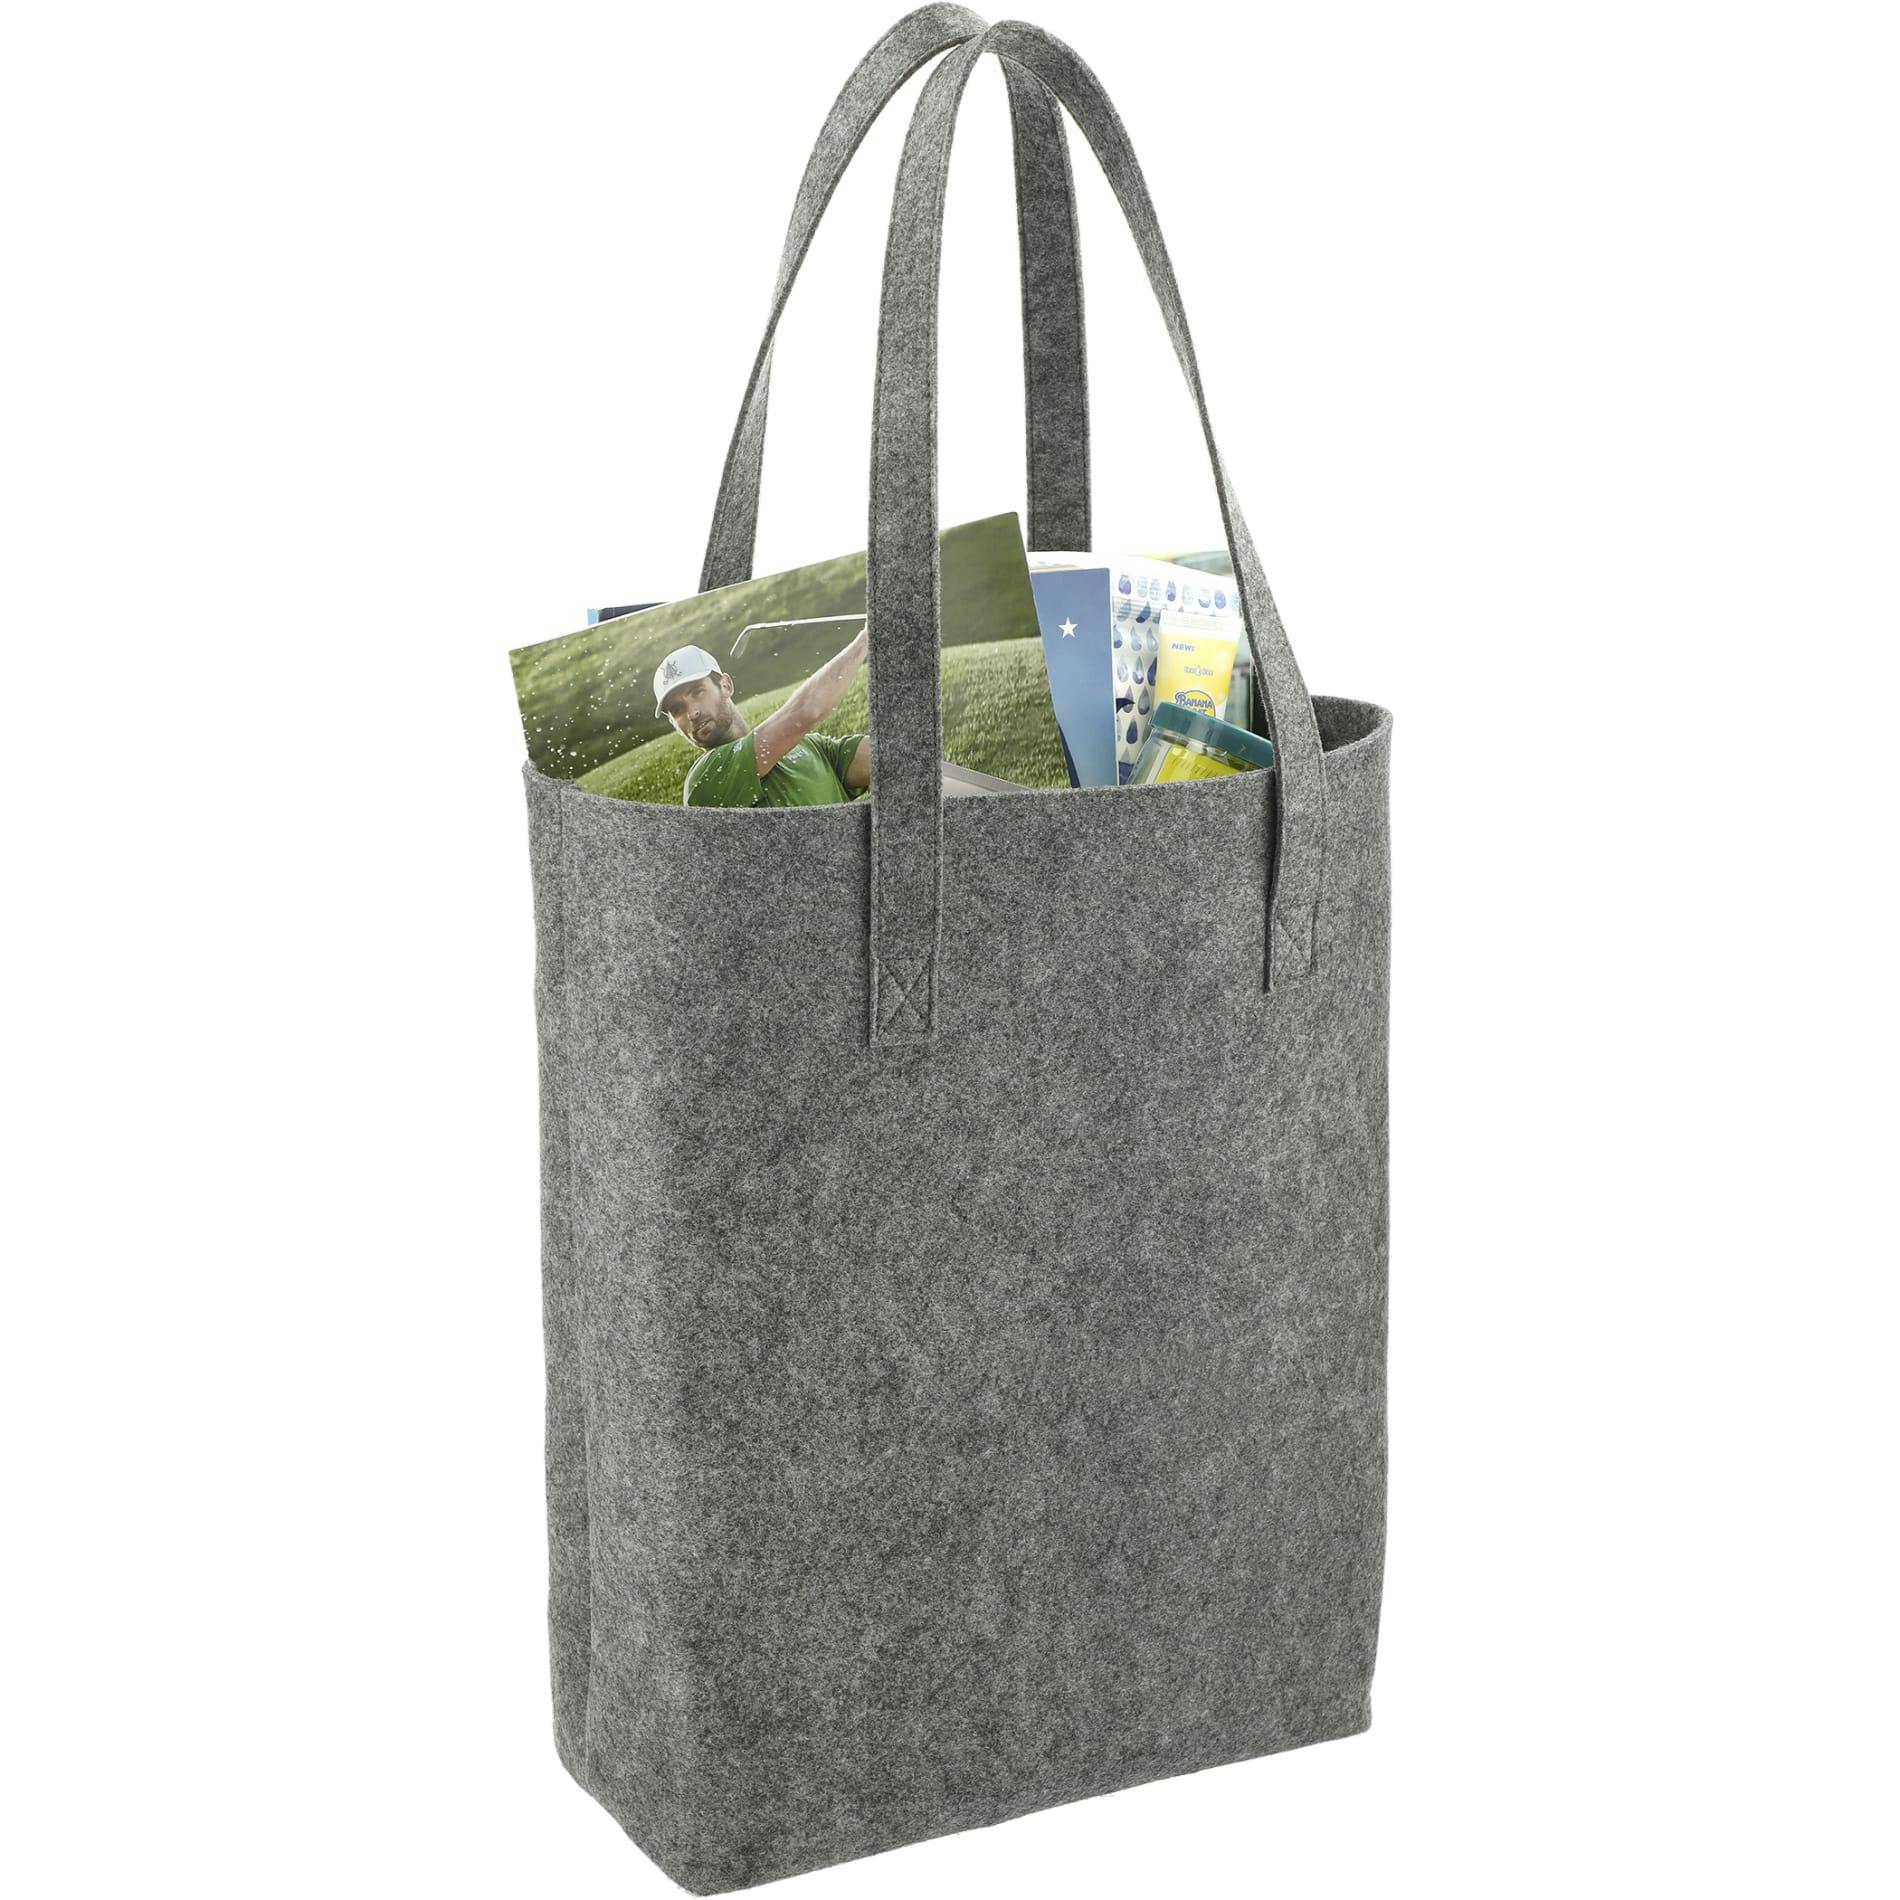 Recycled Felt Shopper Tote - additional Image 6